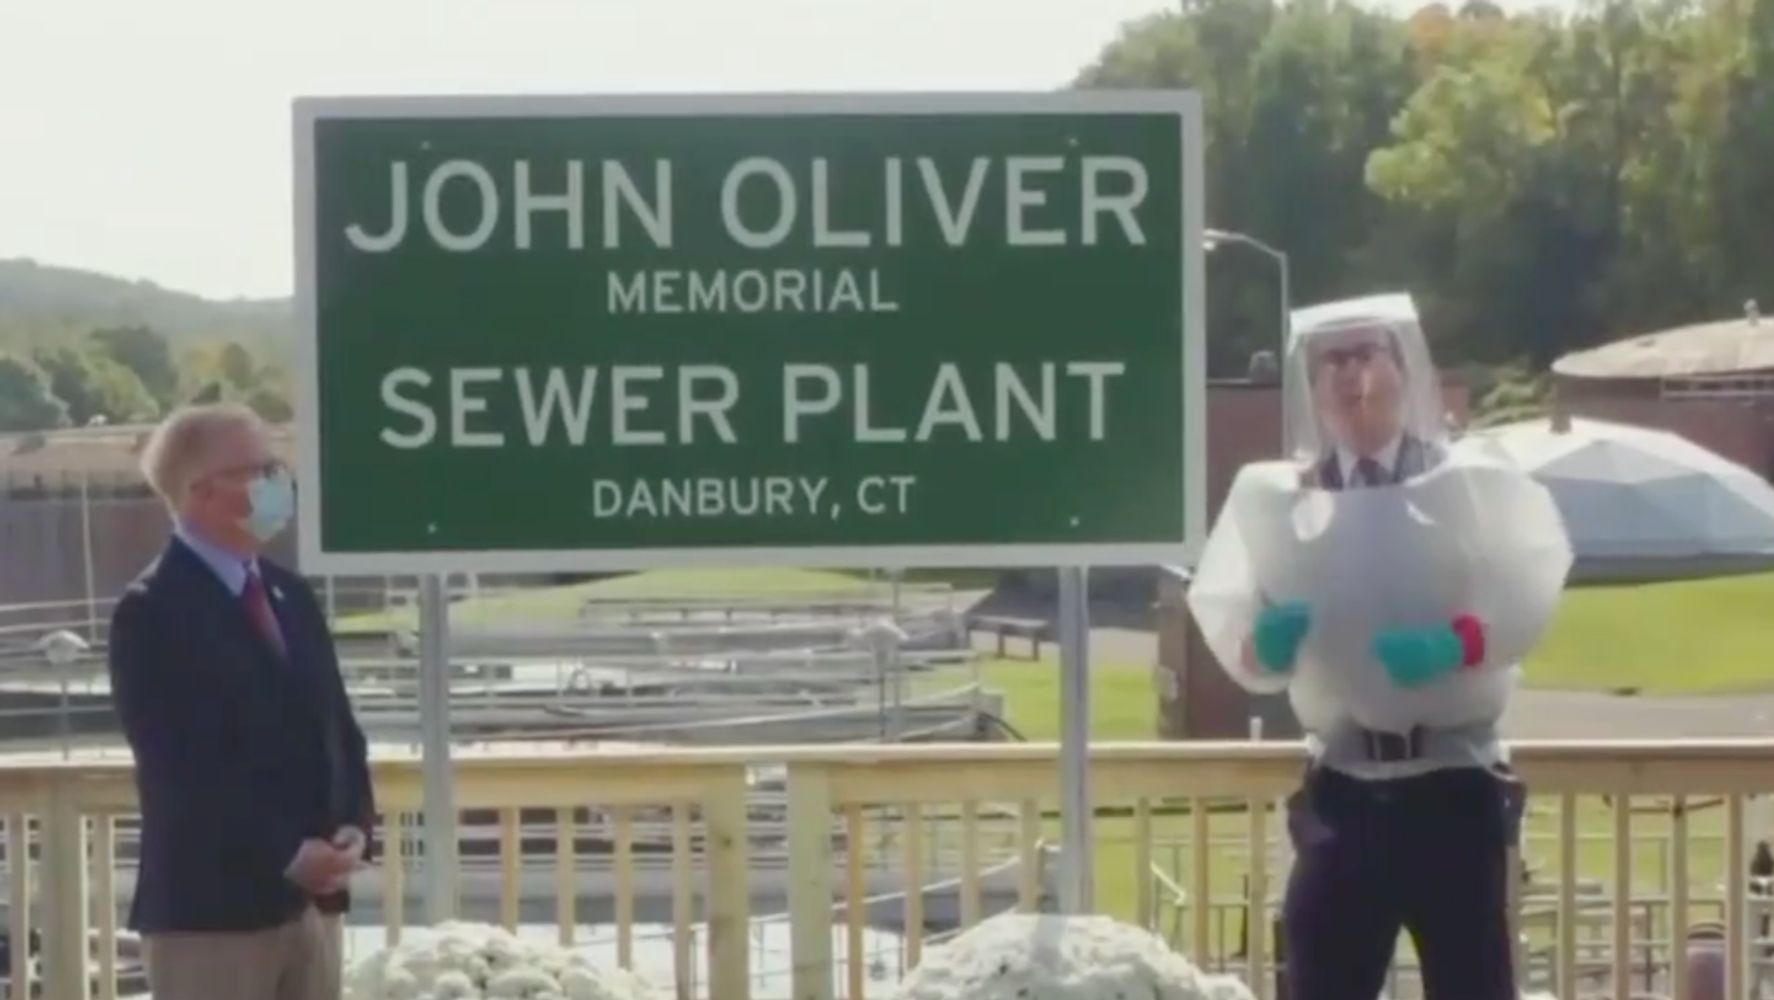 John Oliver Now Has A Sewage Plant Named After Him